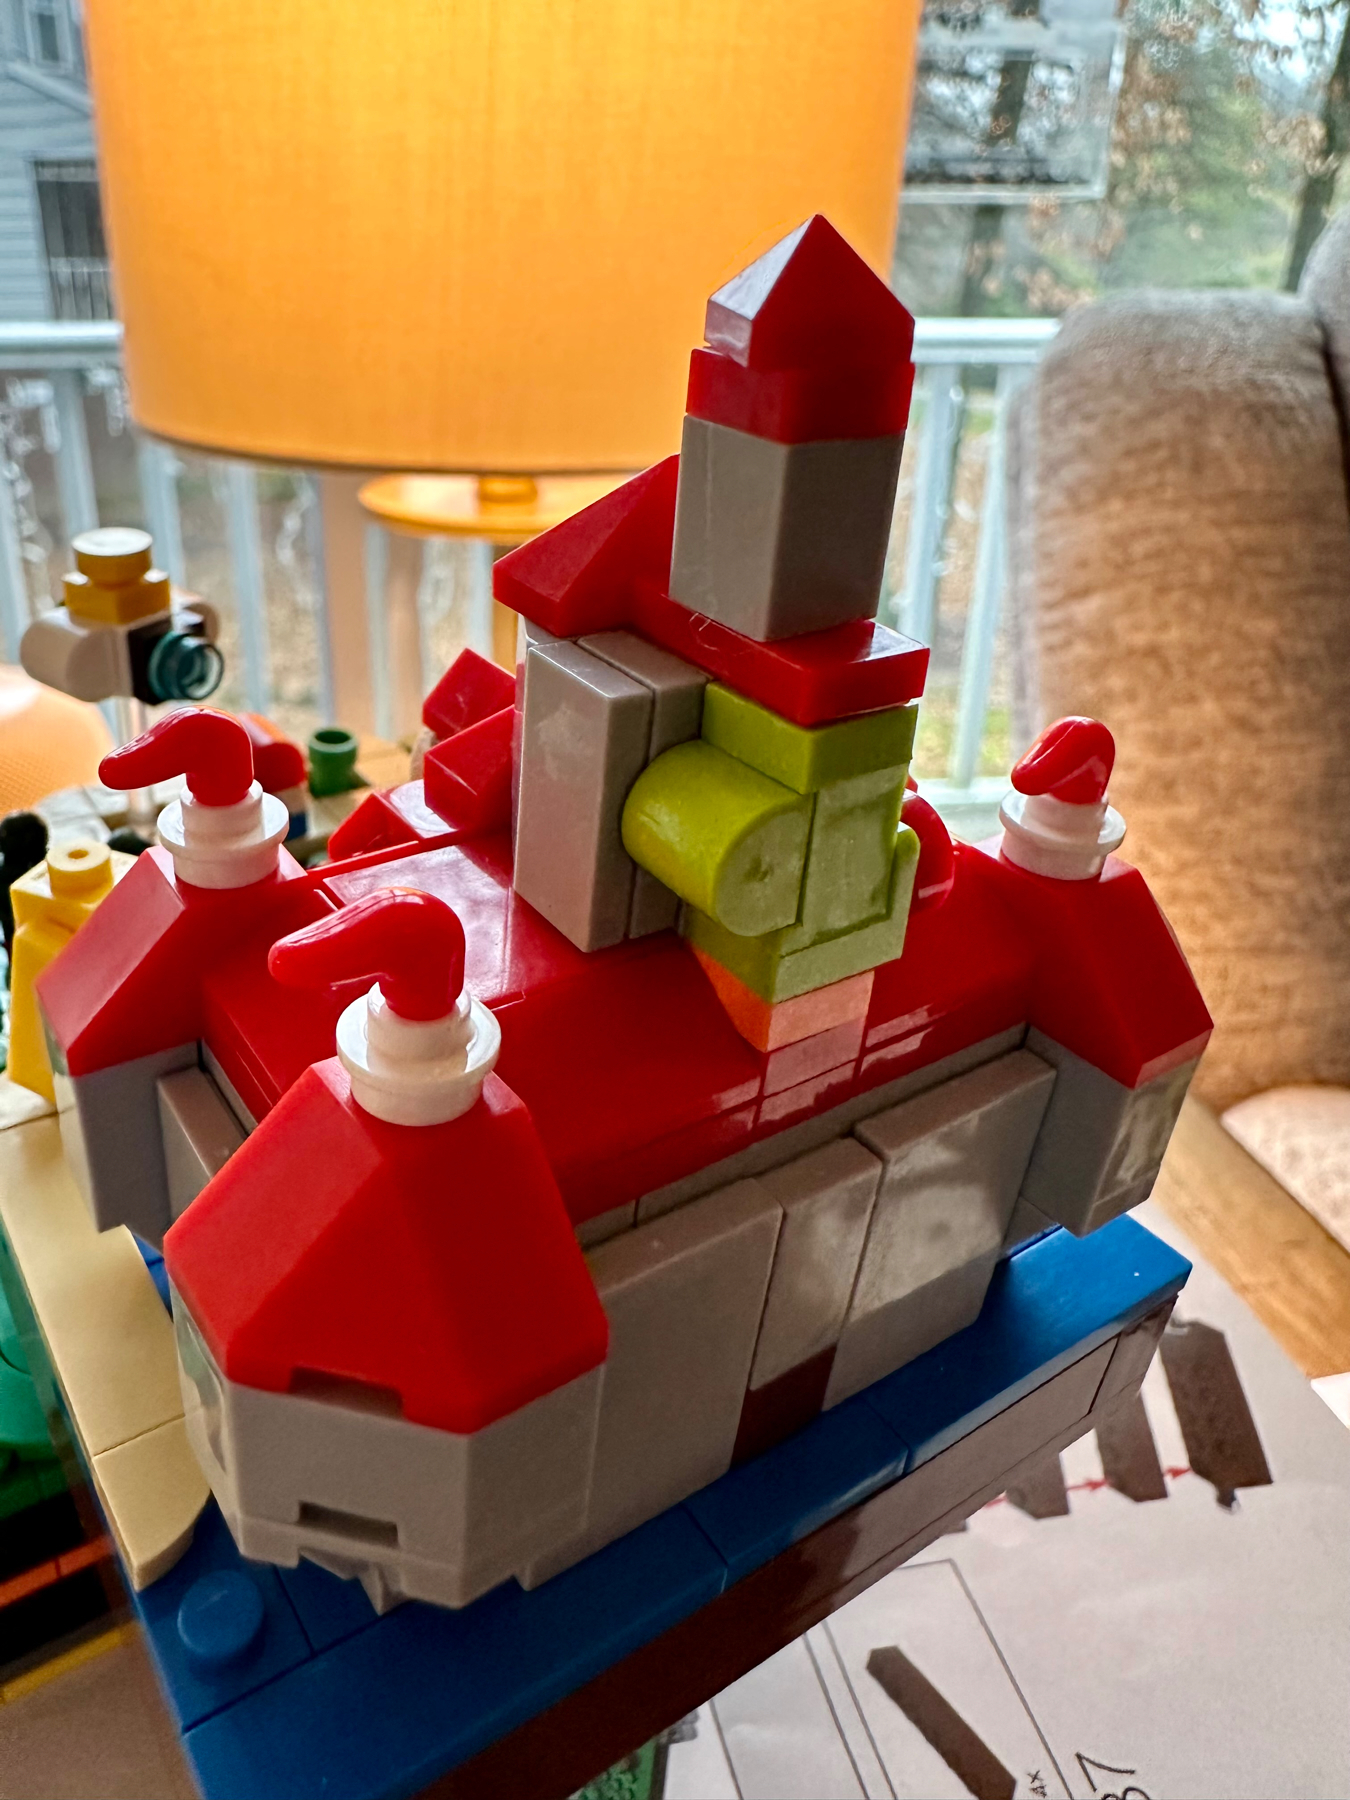 A colorful structure made from building blocks, resembling a whimsically designed castle with red rooftops, a central tower, and various shapes and sizes of blocks.